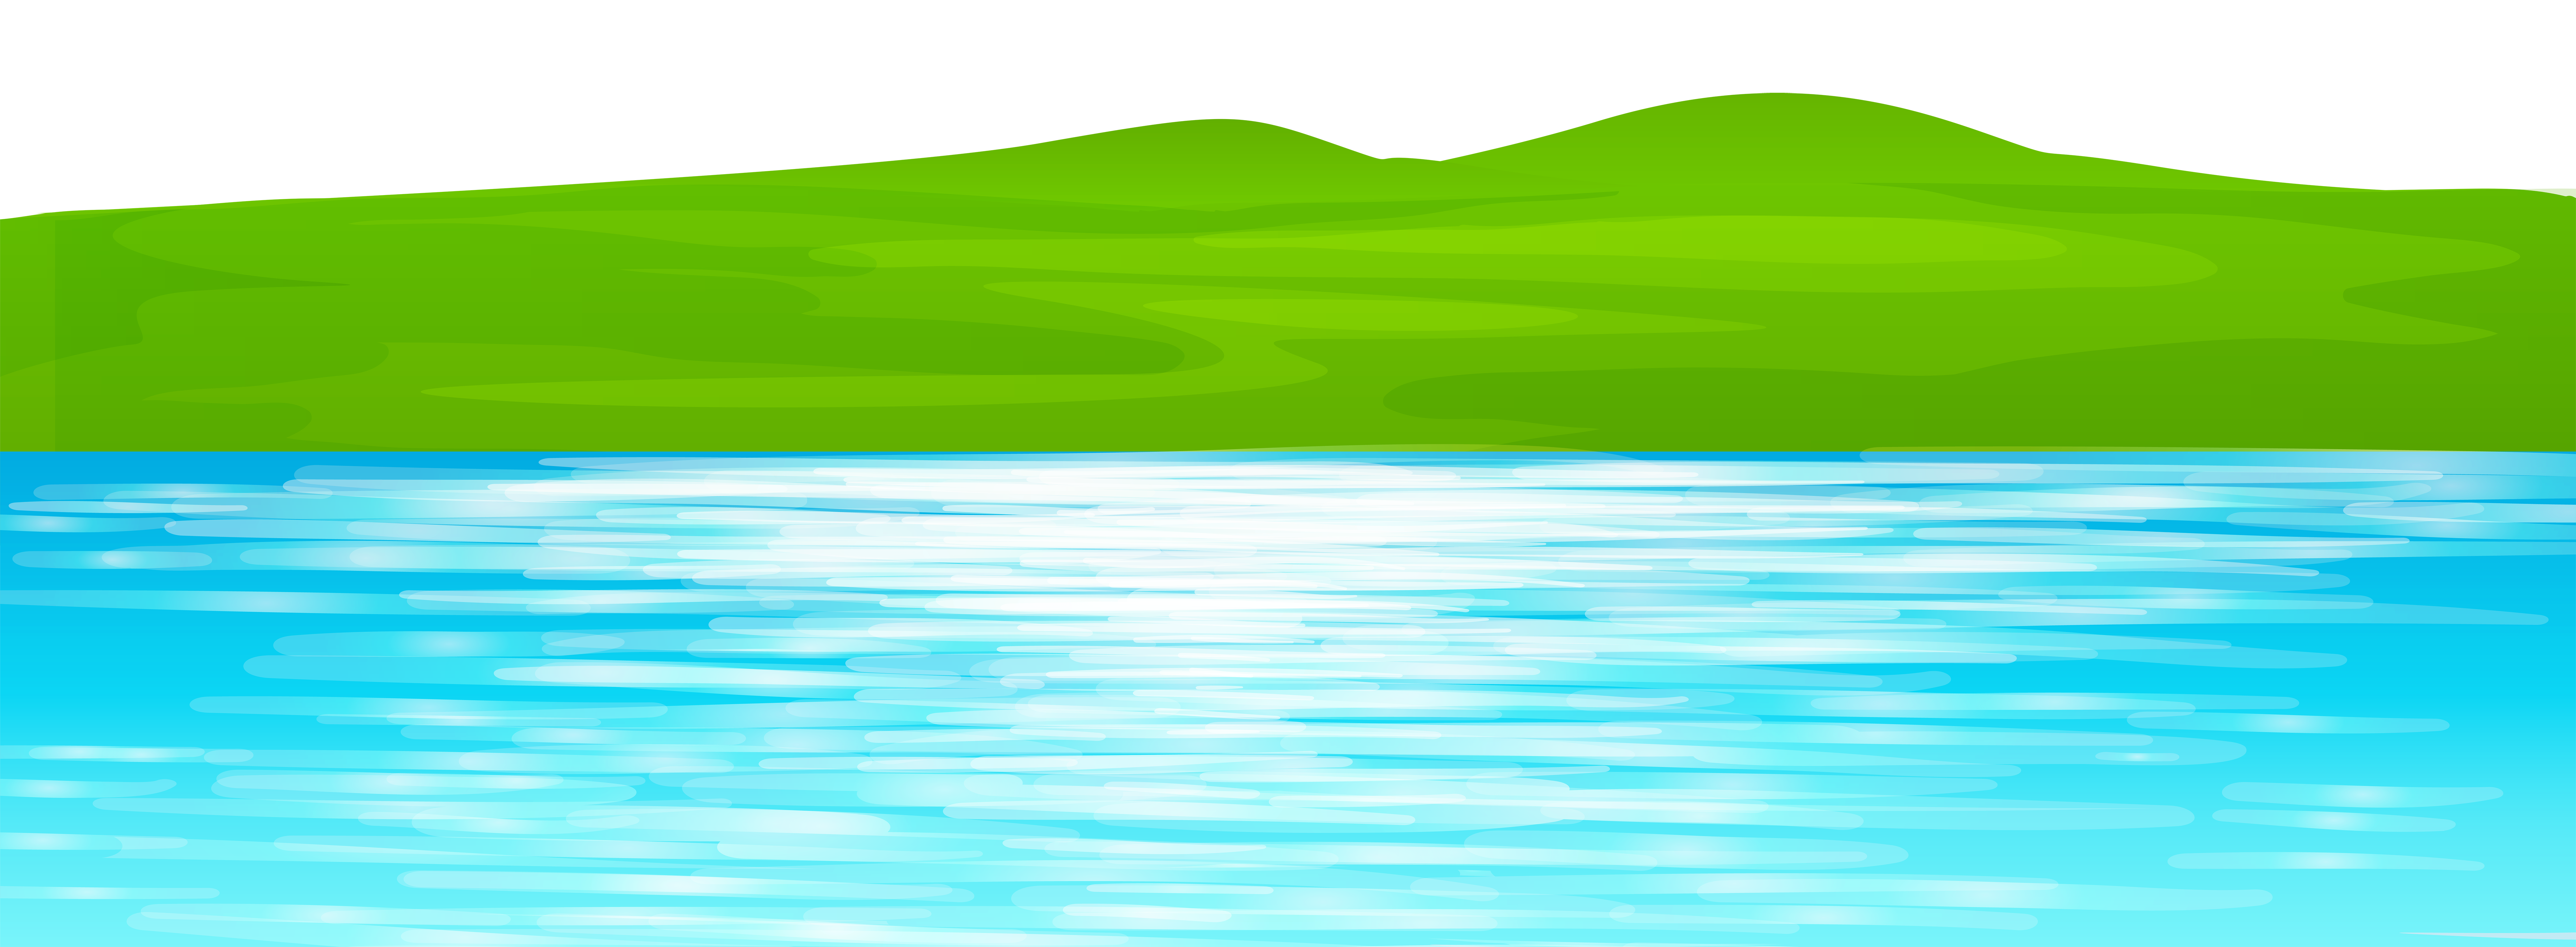 Water clipart lake, Water lake Transparent FREE for download